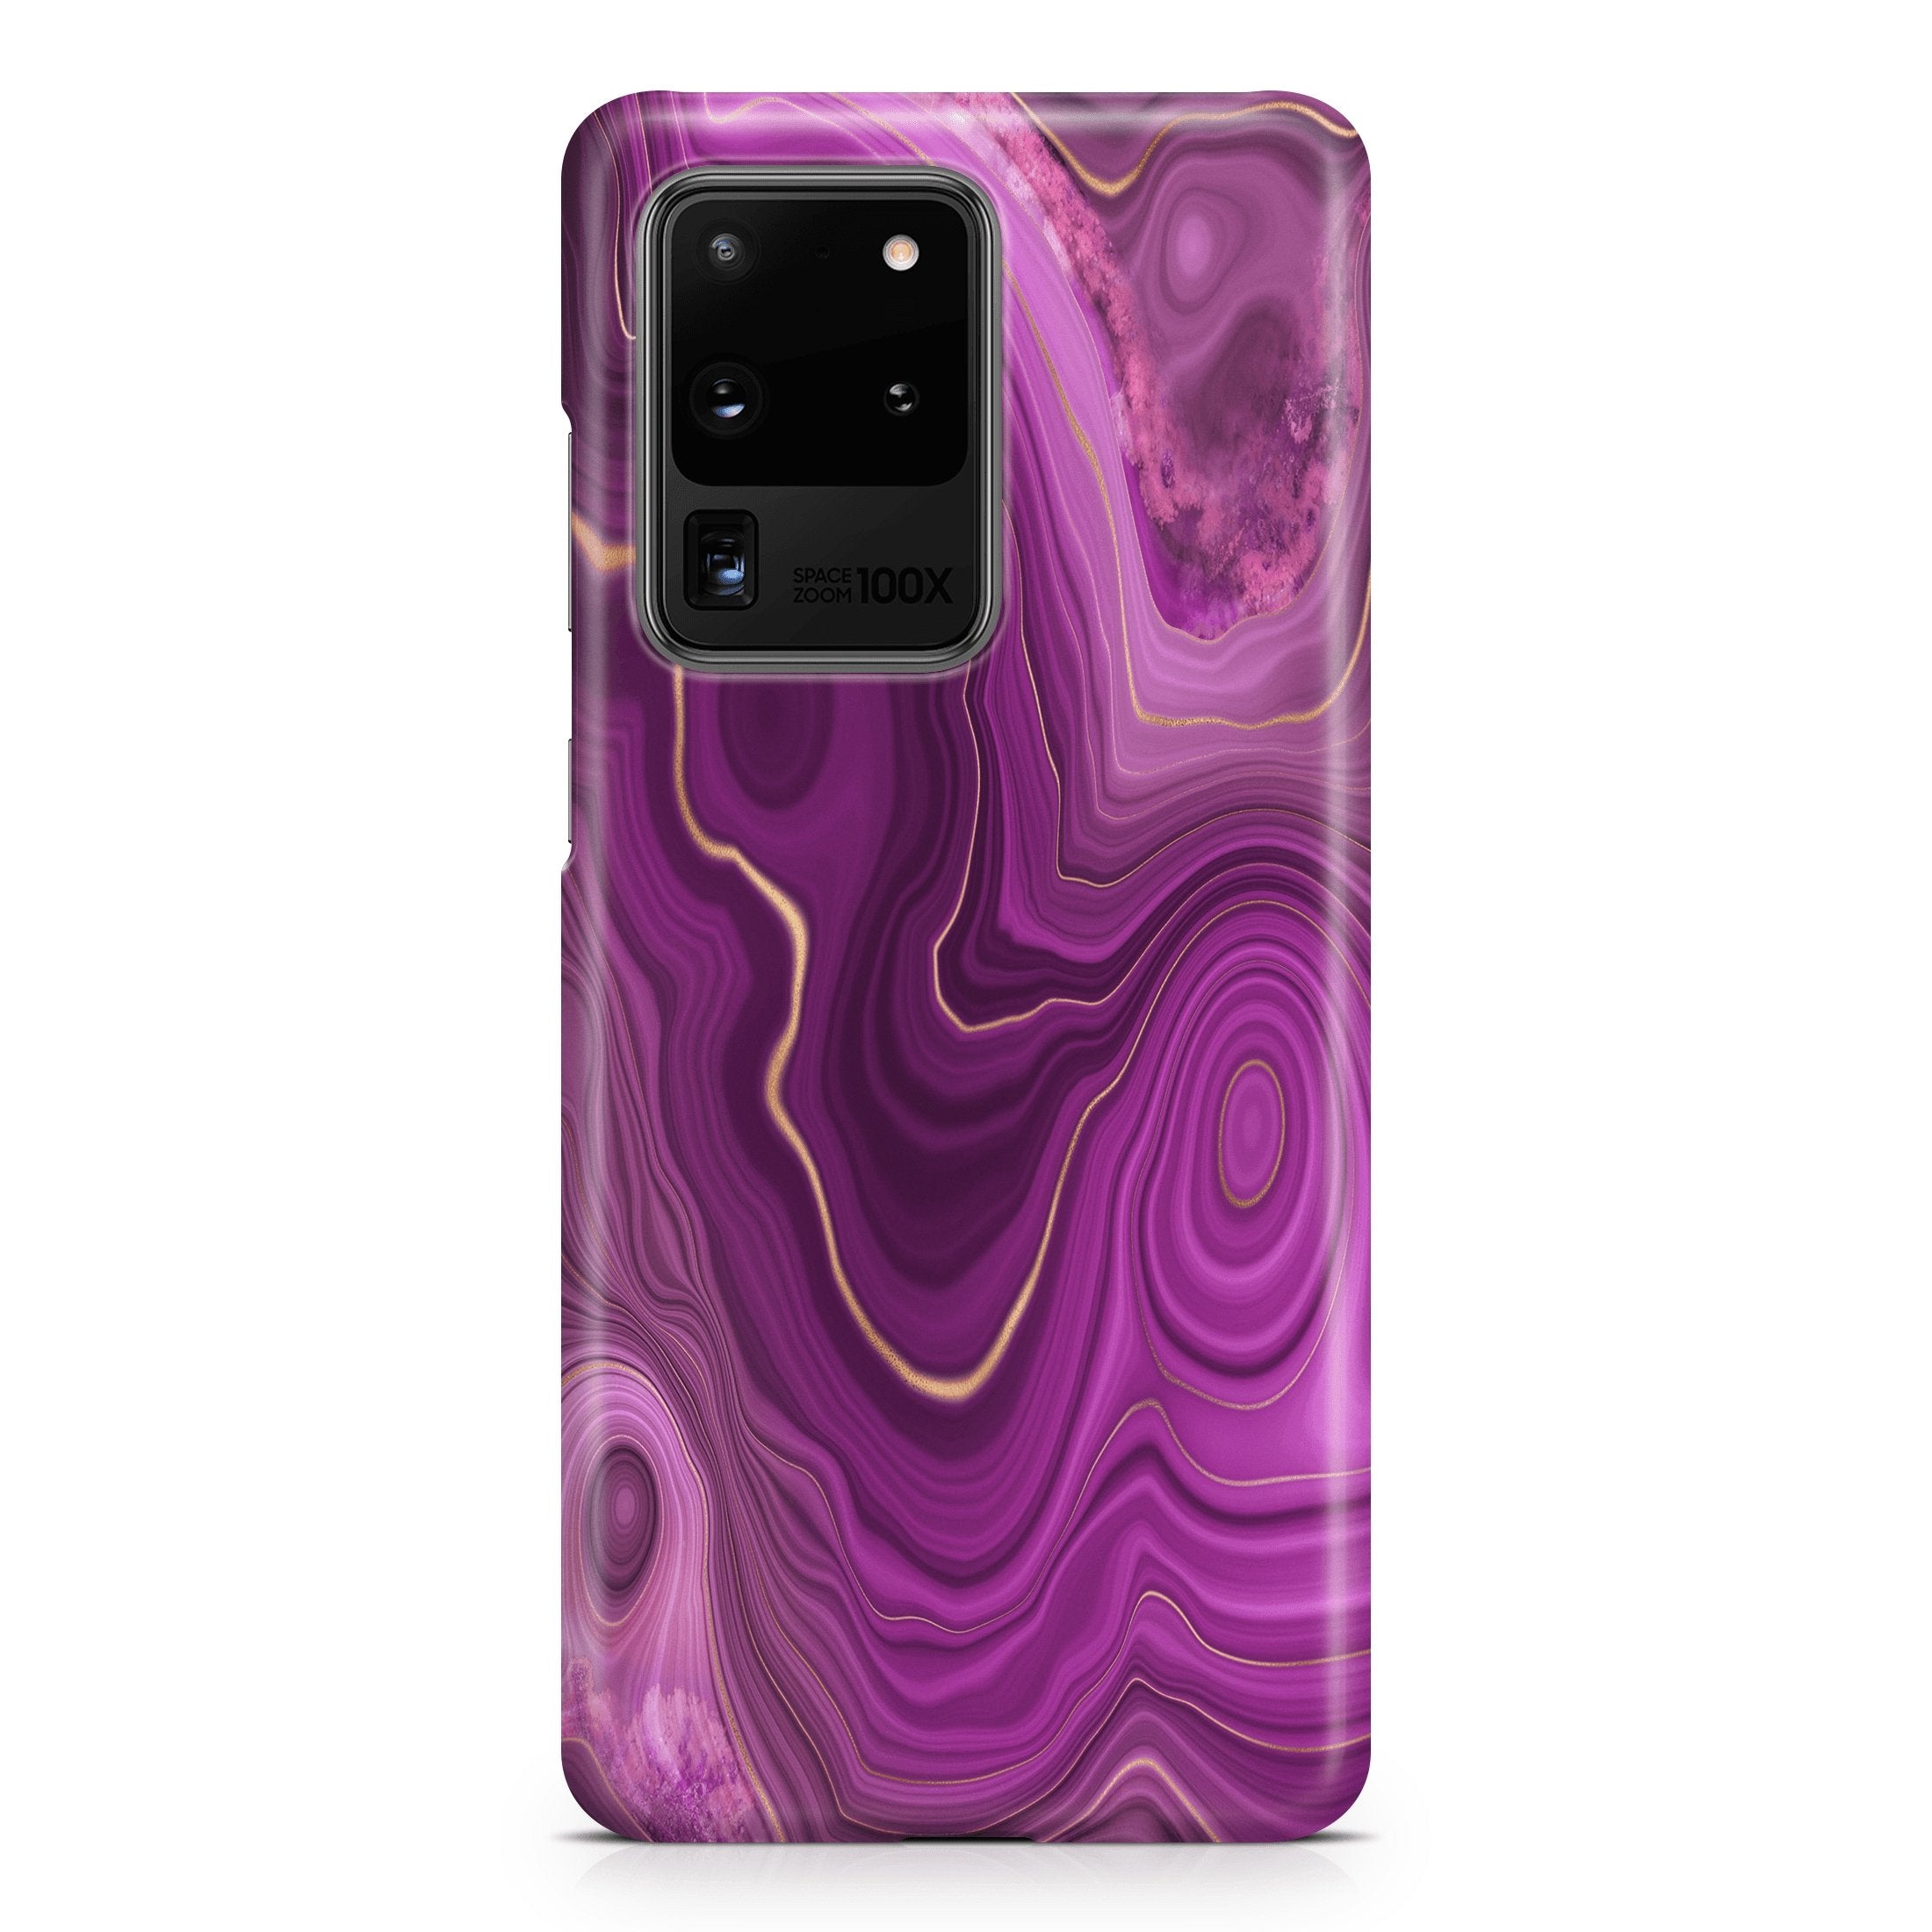 Amethyst Strata III - Samsung phone case designs by CaseSwagger